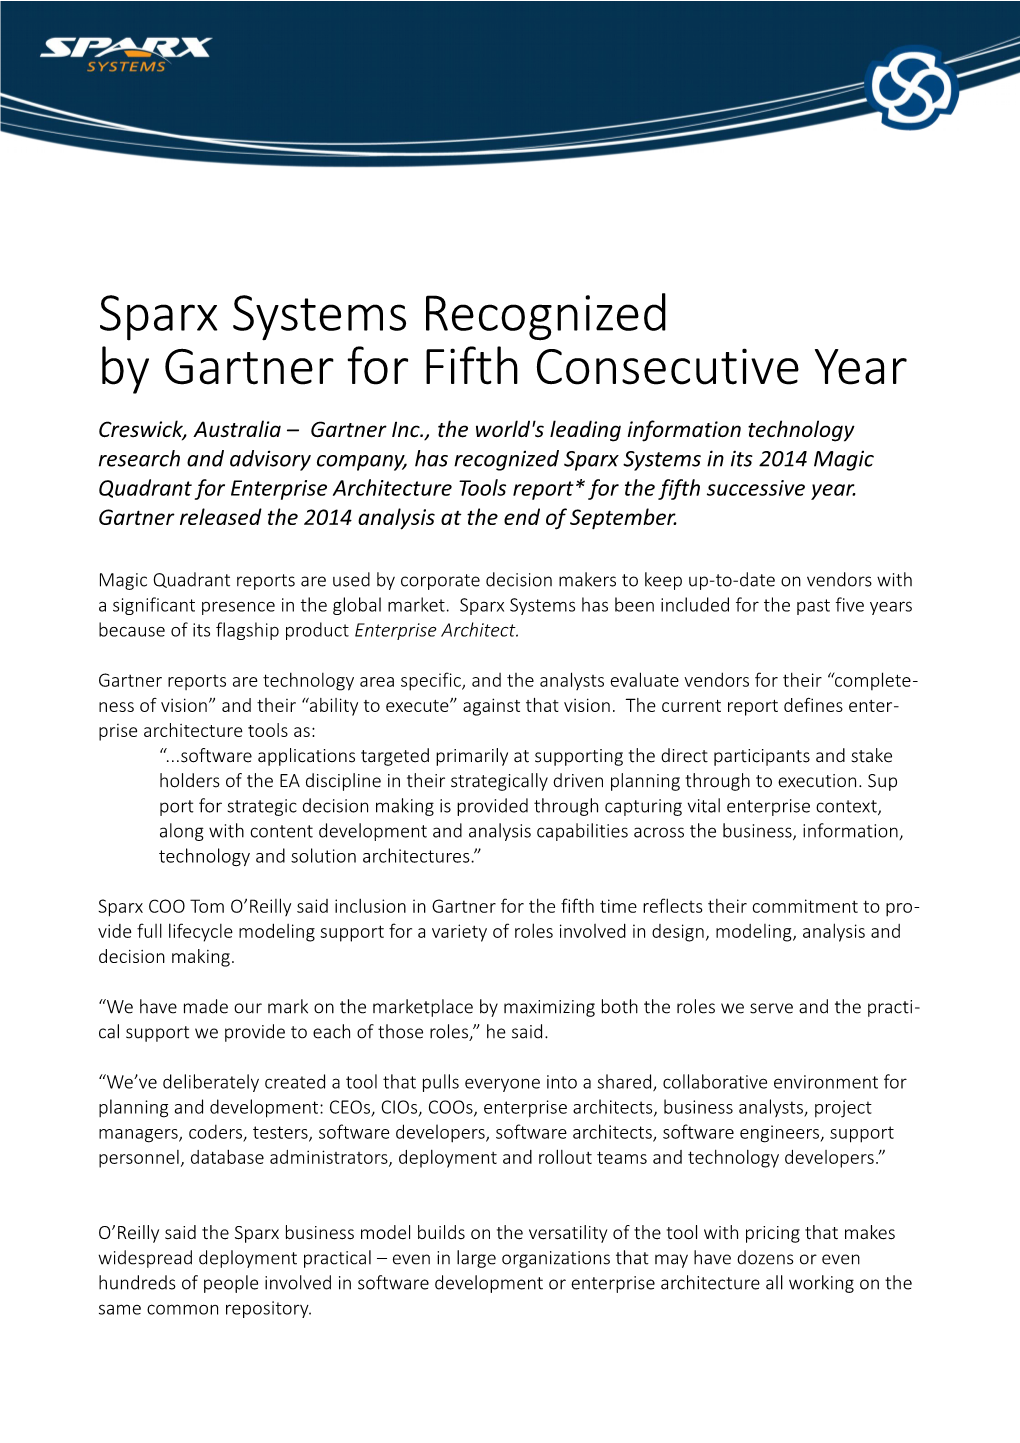 Sparx Systems Recognized by Gartner for Fifth Consecutive Year